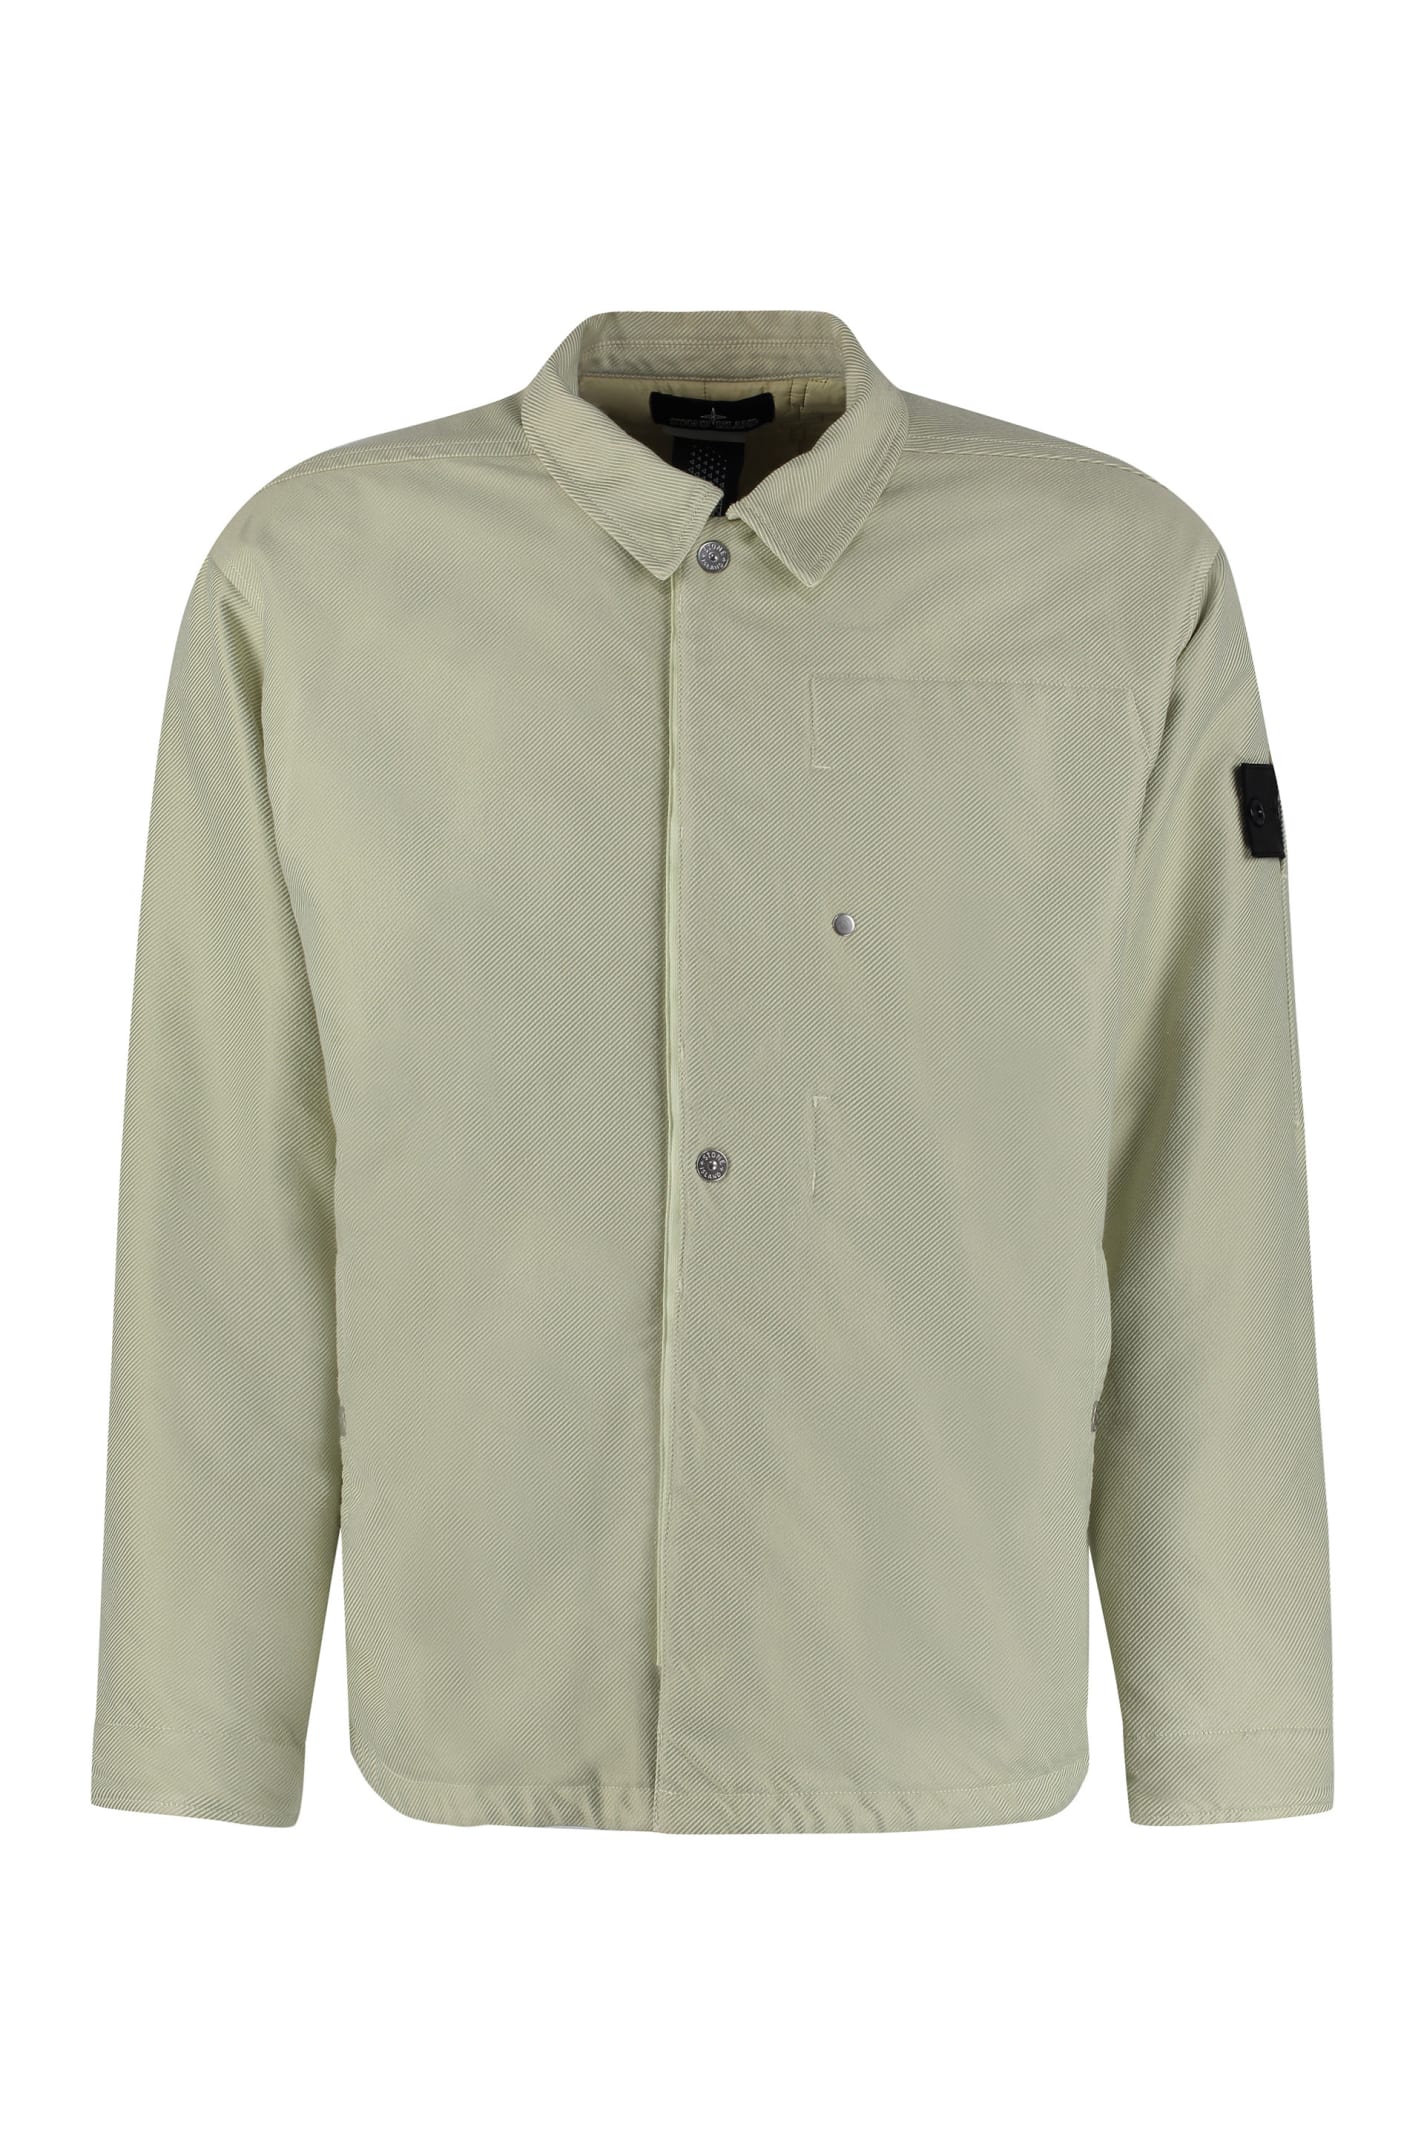 Stone Island Shadow Project Button Front Jacket